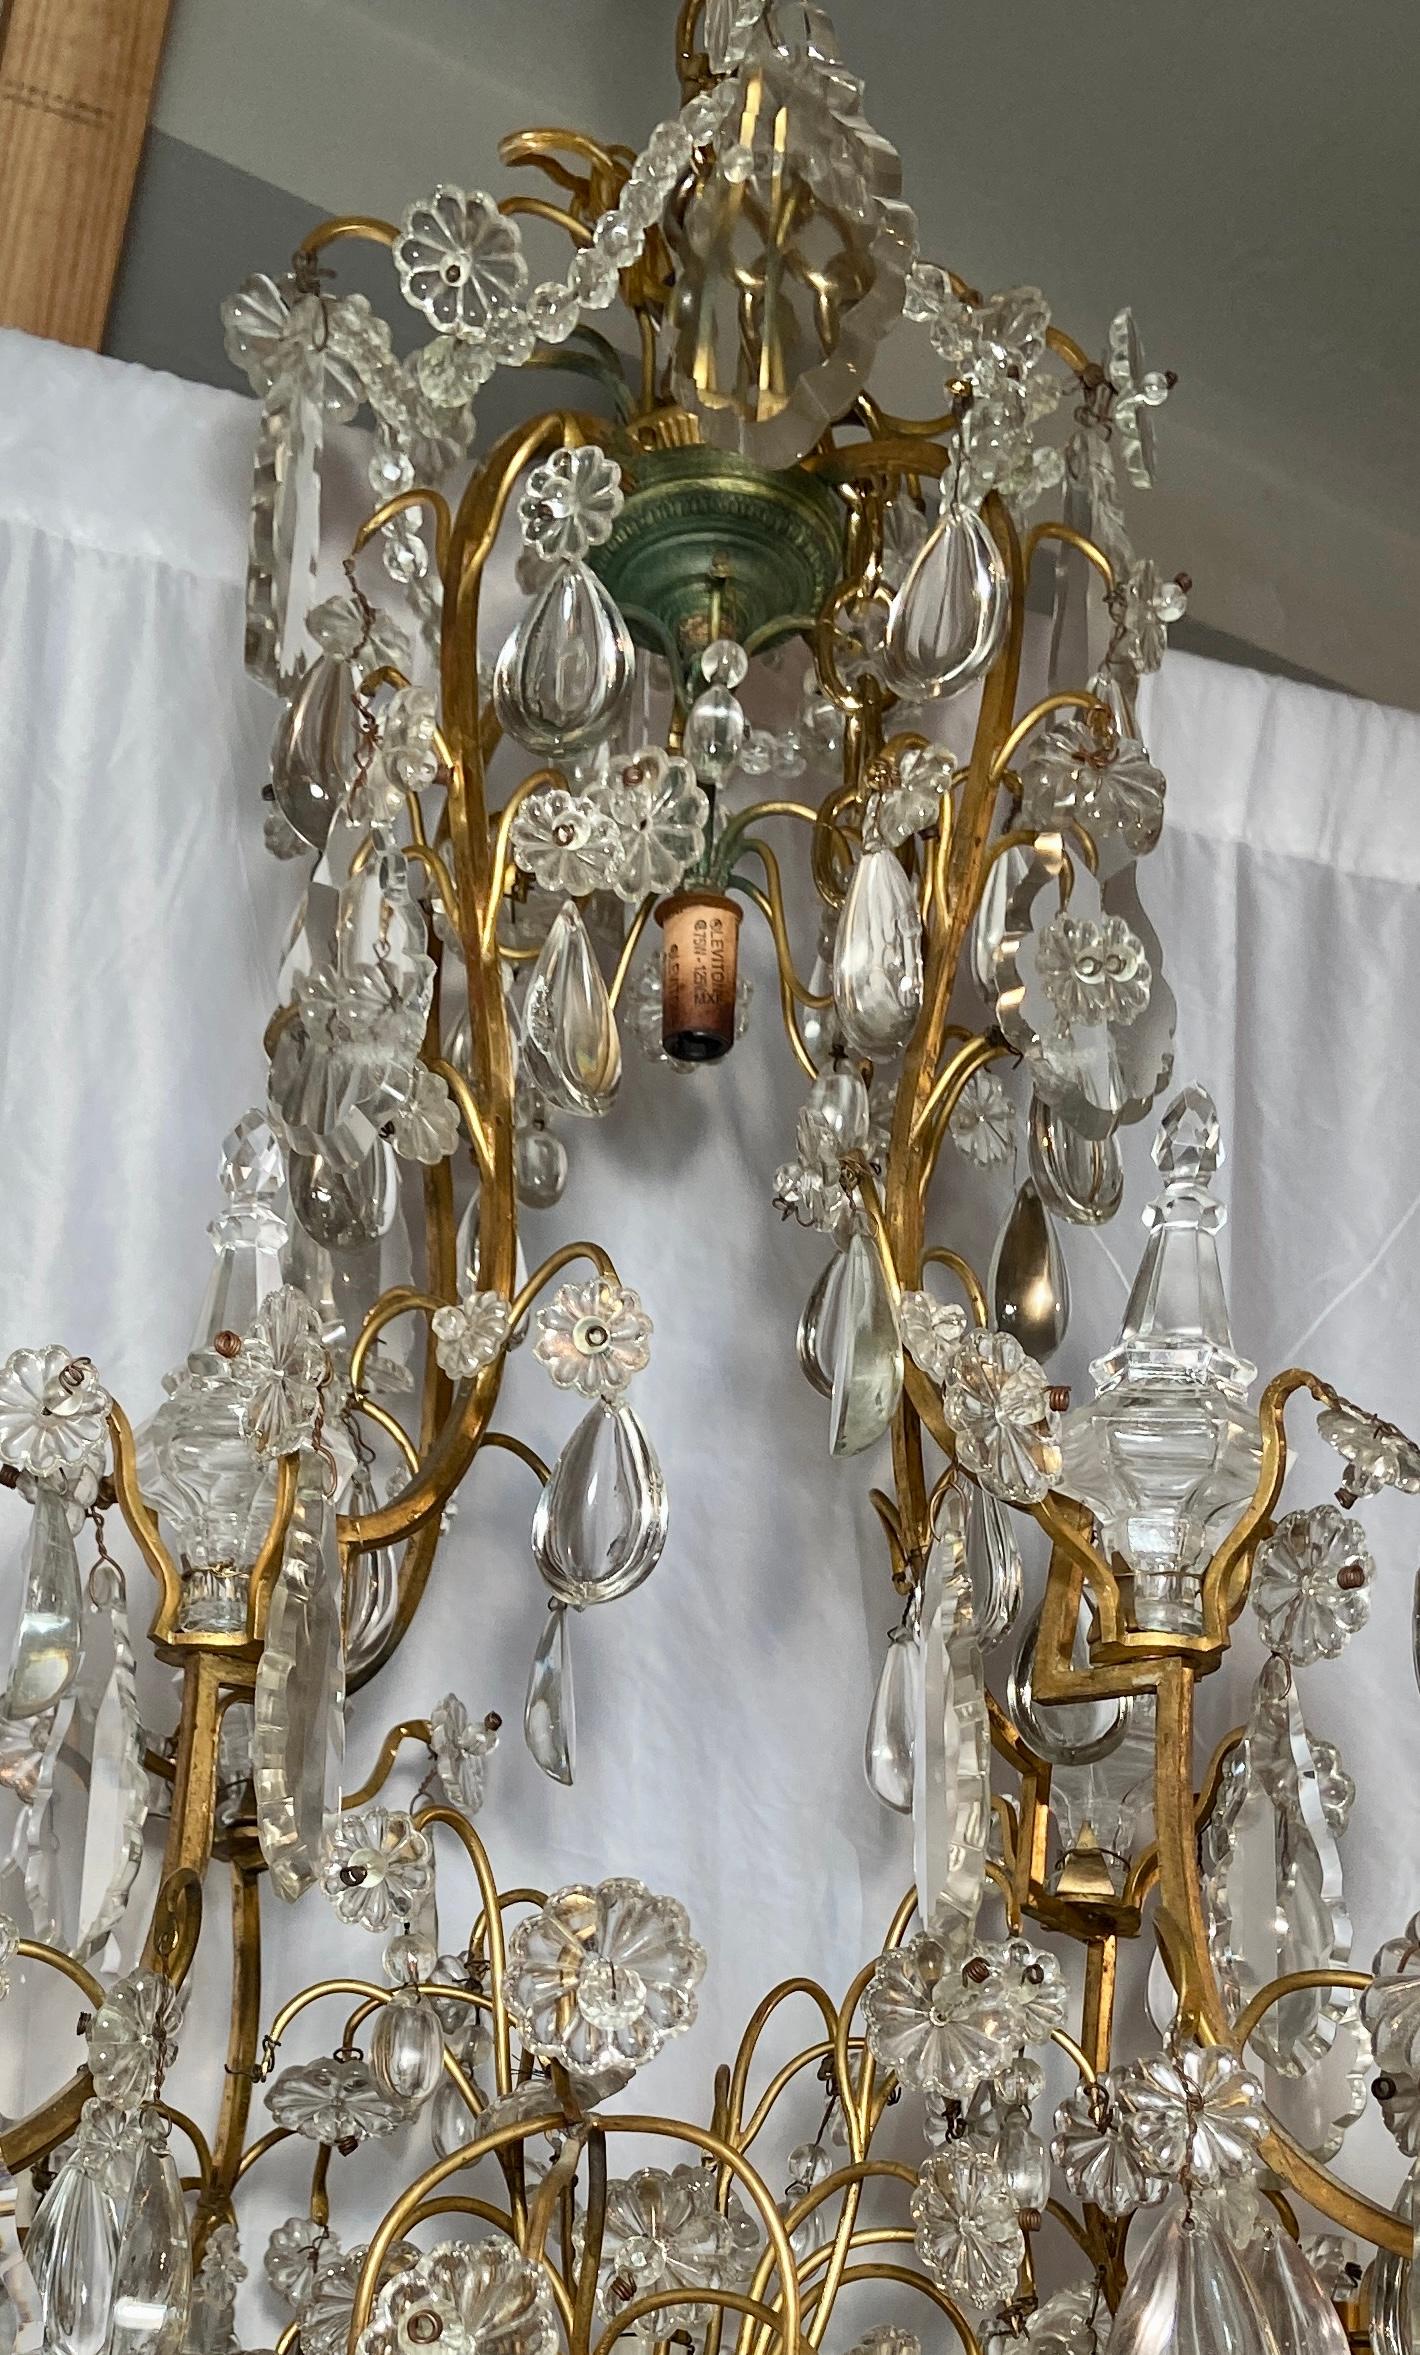 Antique French Parisian crystal and gold bronze chandelier, Circa 1890.